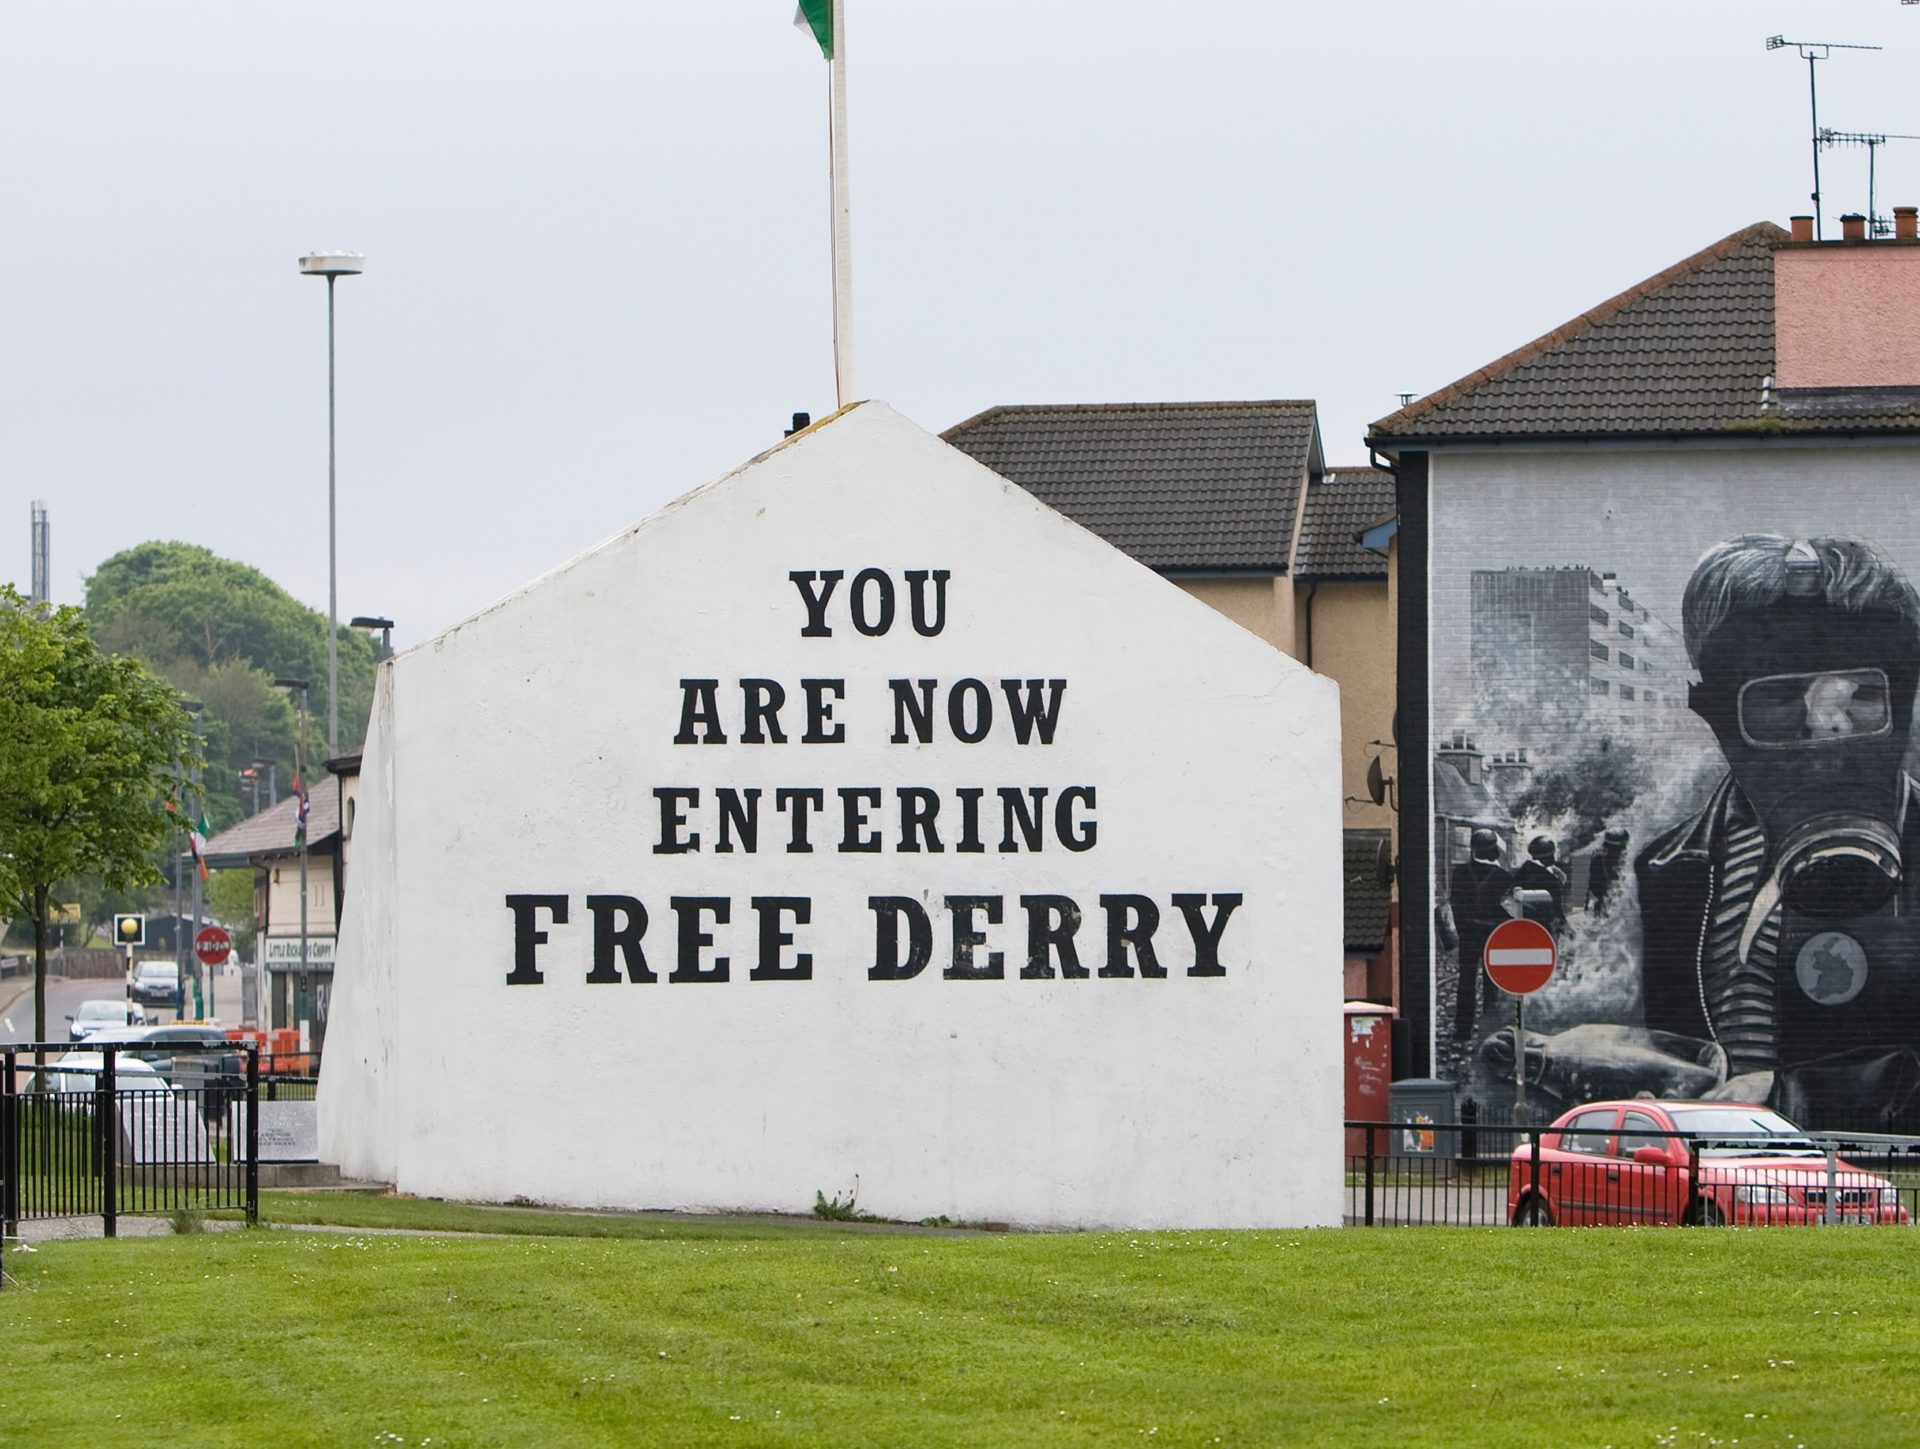 File photo shows the 'Free Derry' mural in Co Derry, Northern Ireland in 2009